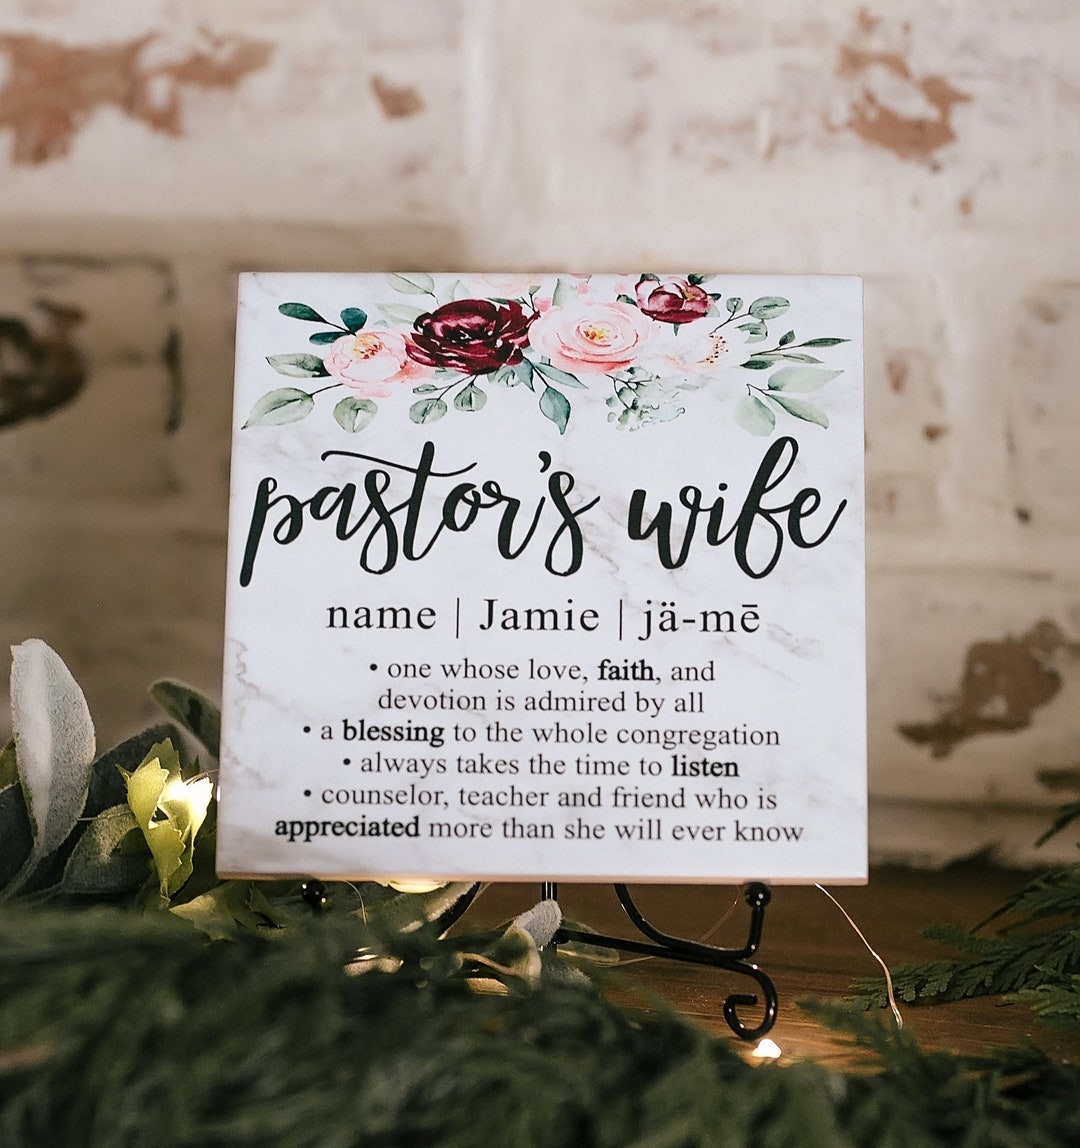 Pastors Wife Appreciation Day Tile Plaque Gift and Stand image pic